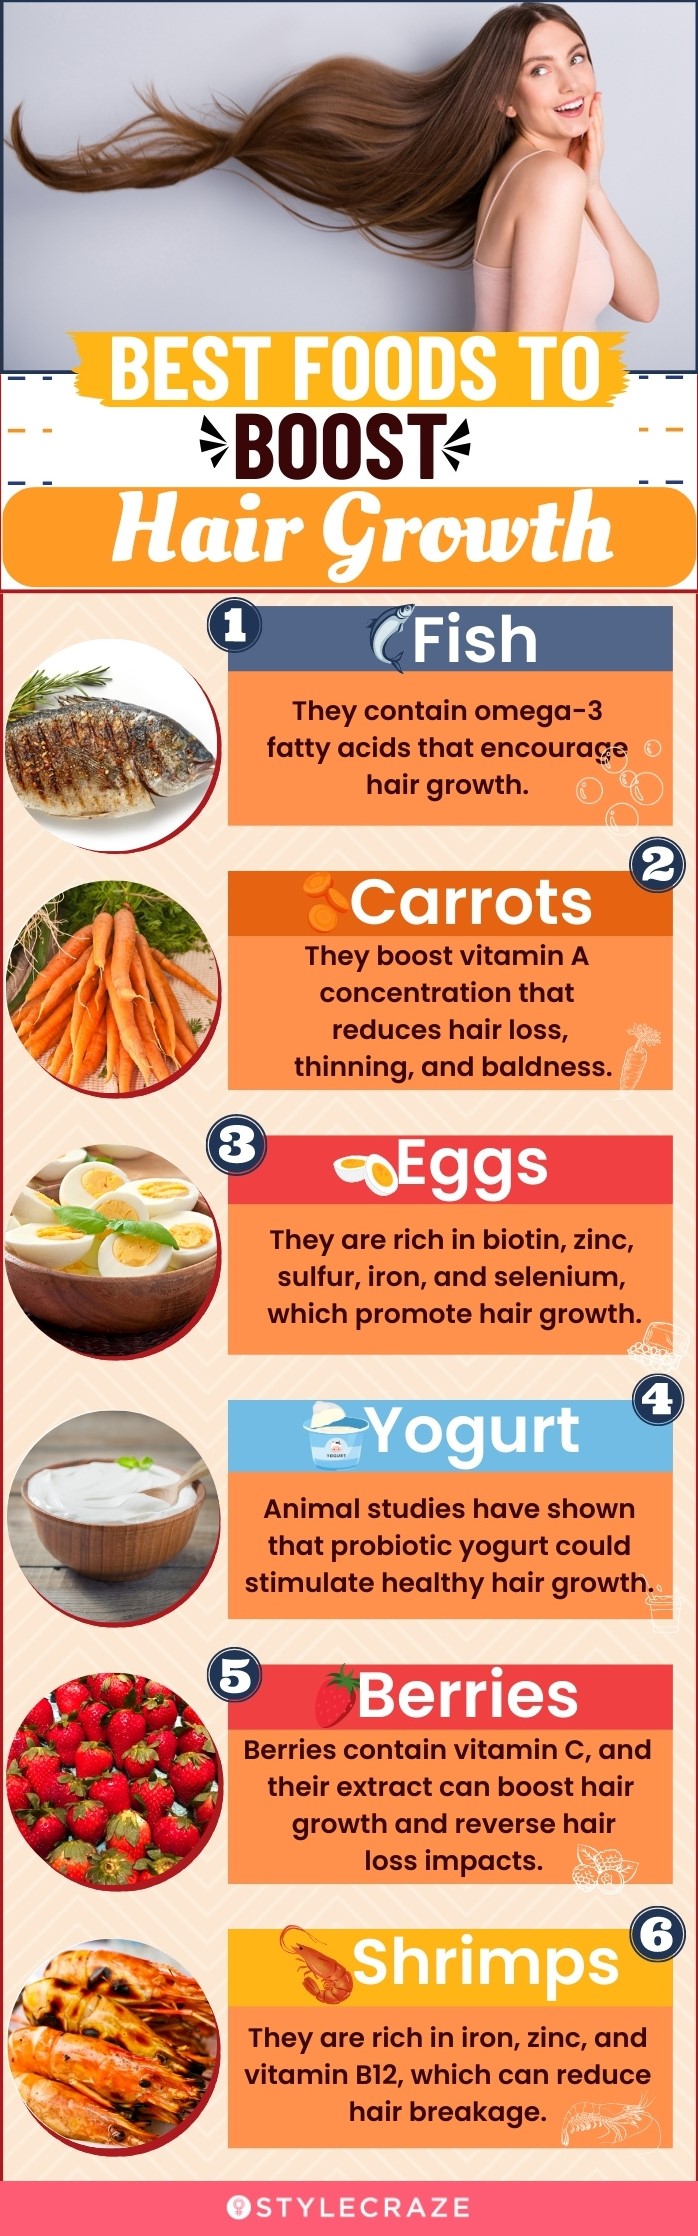 The Best Foods for Hair Growth, According to Science